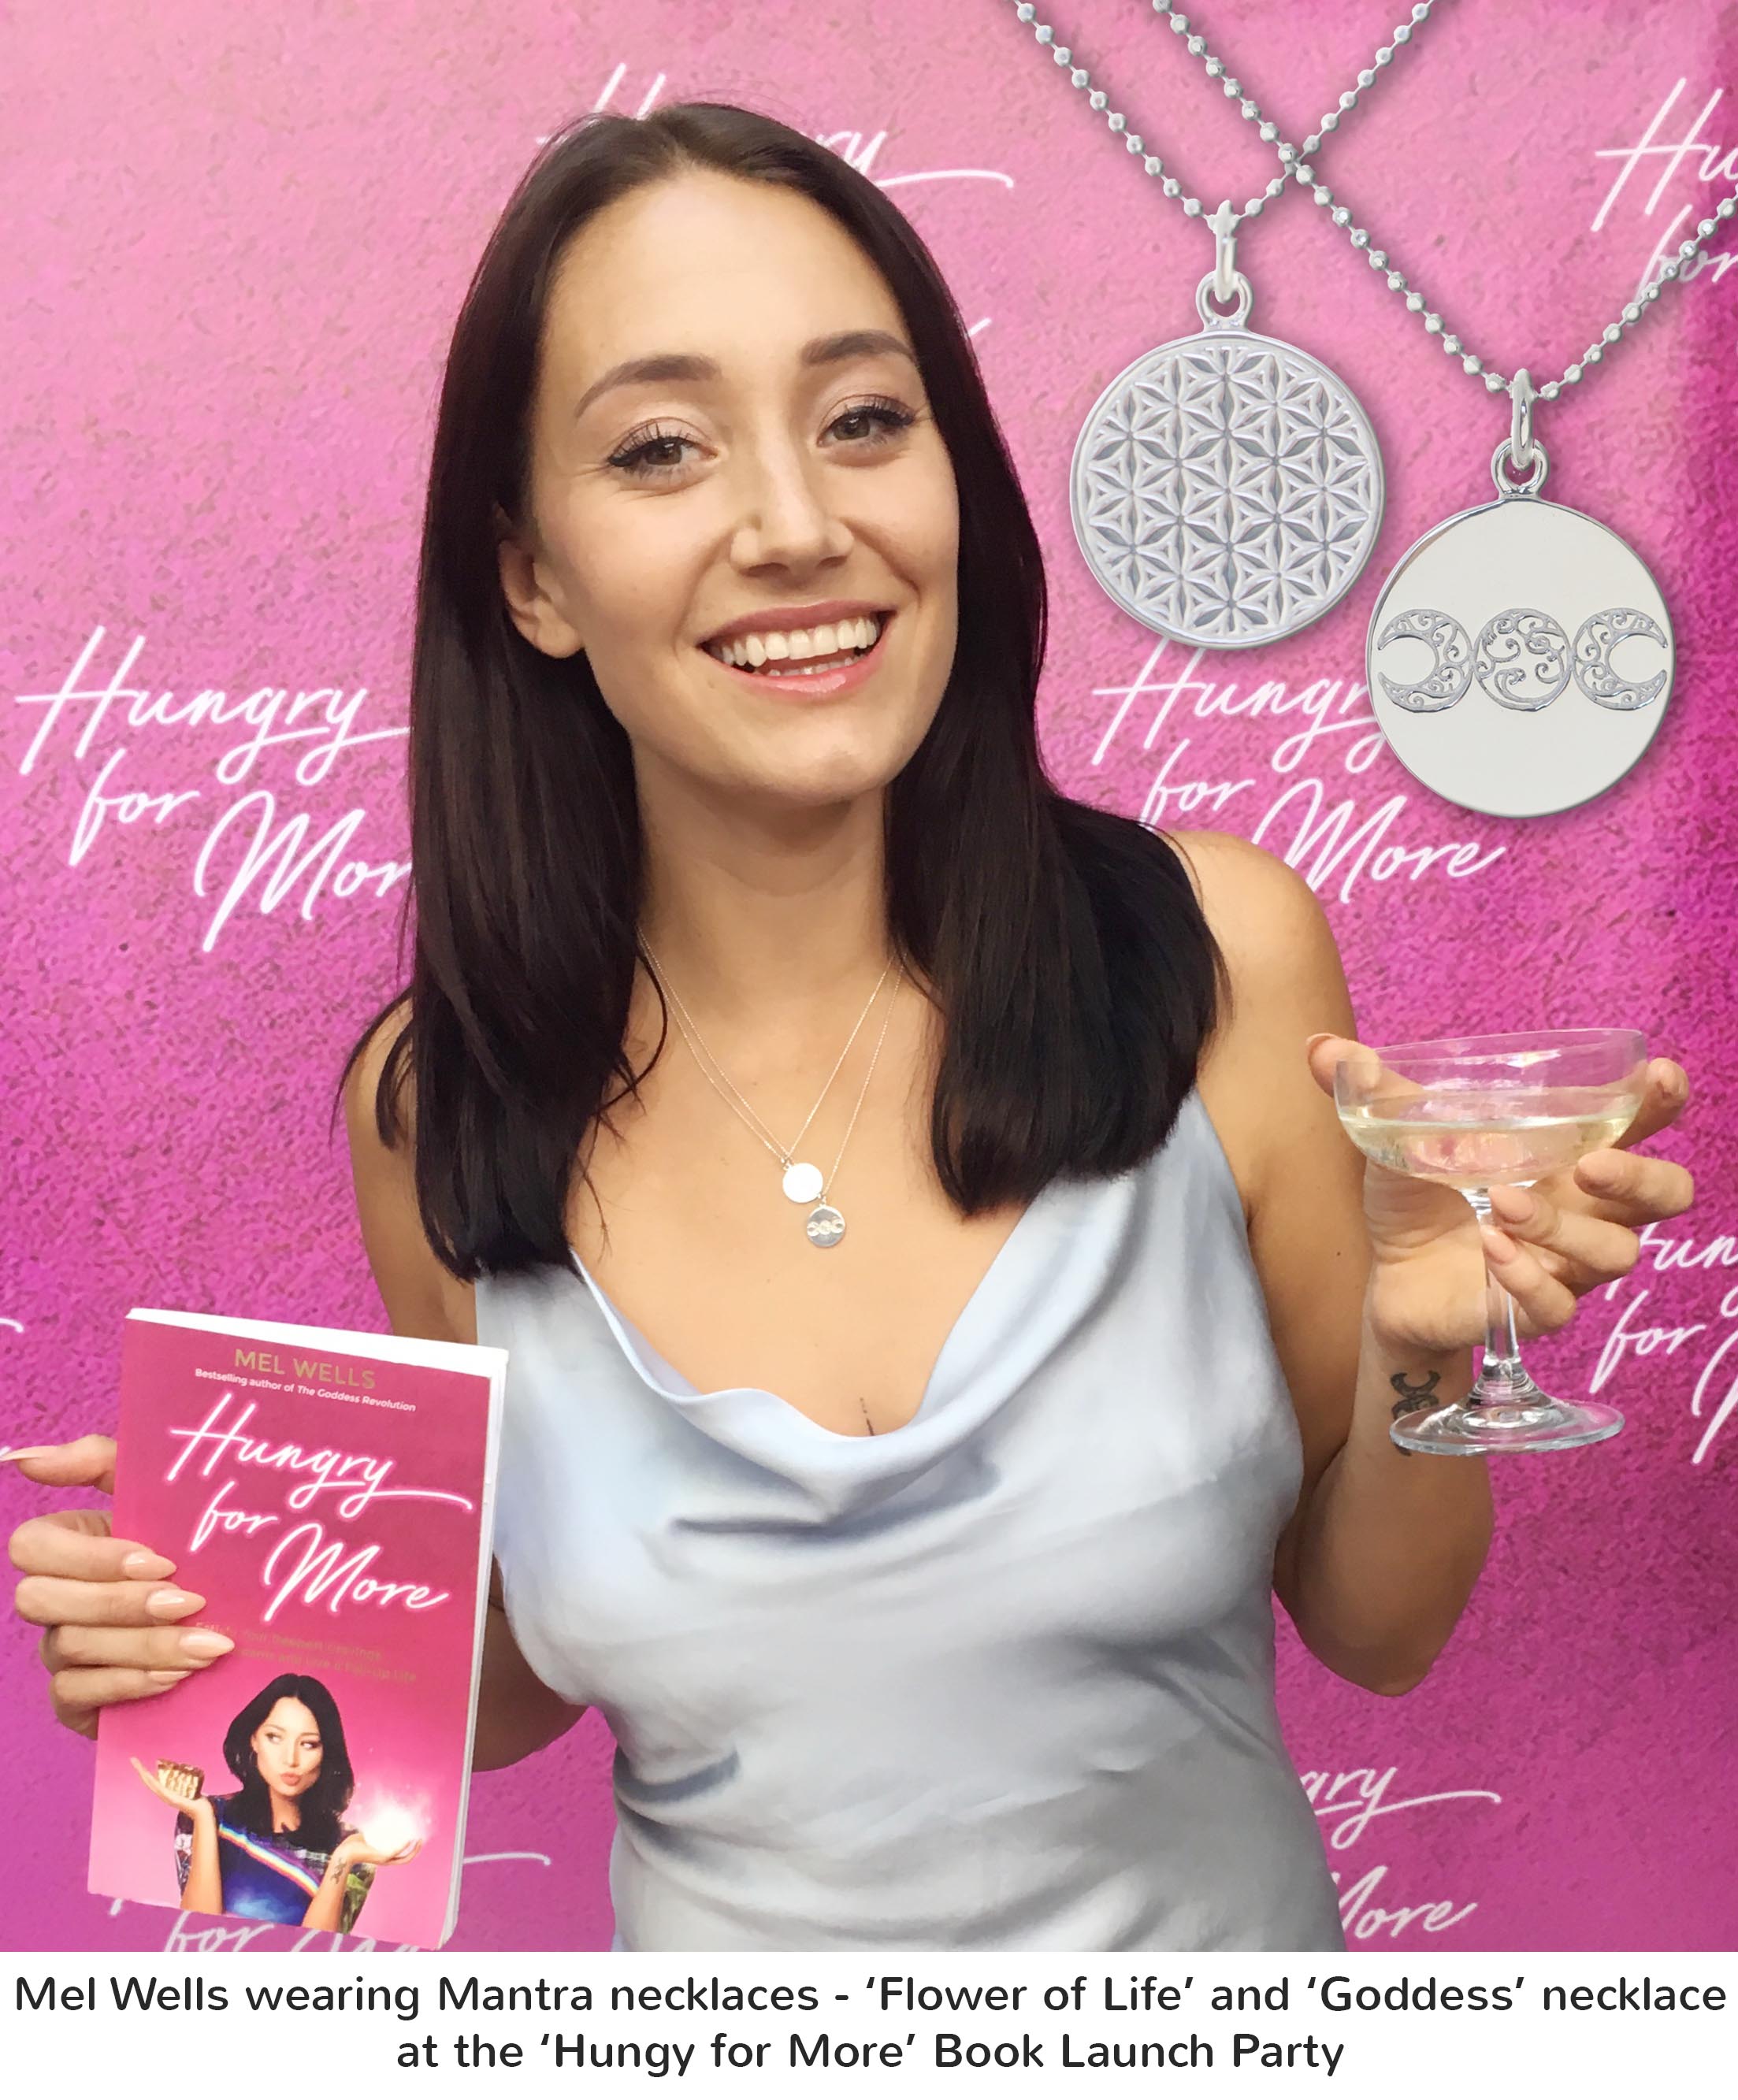 Mel Well wearing Mantra Necklaces at her Book launch party